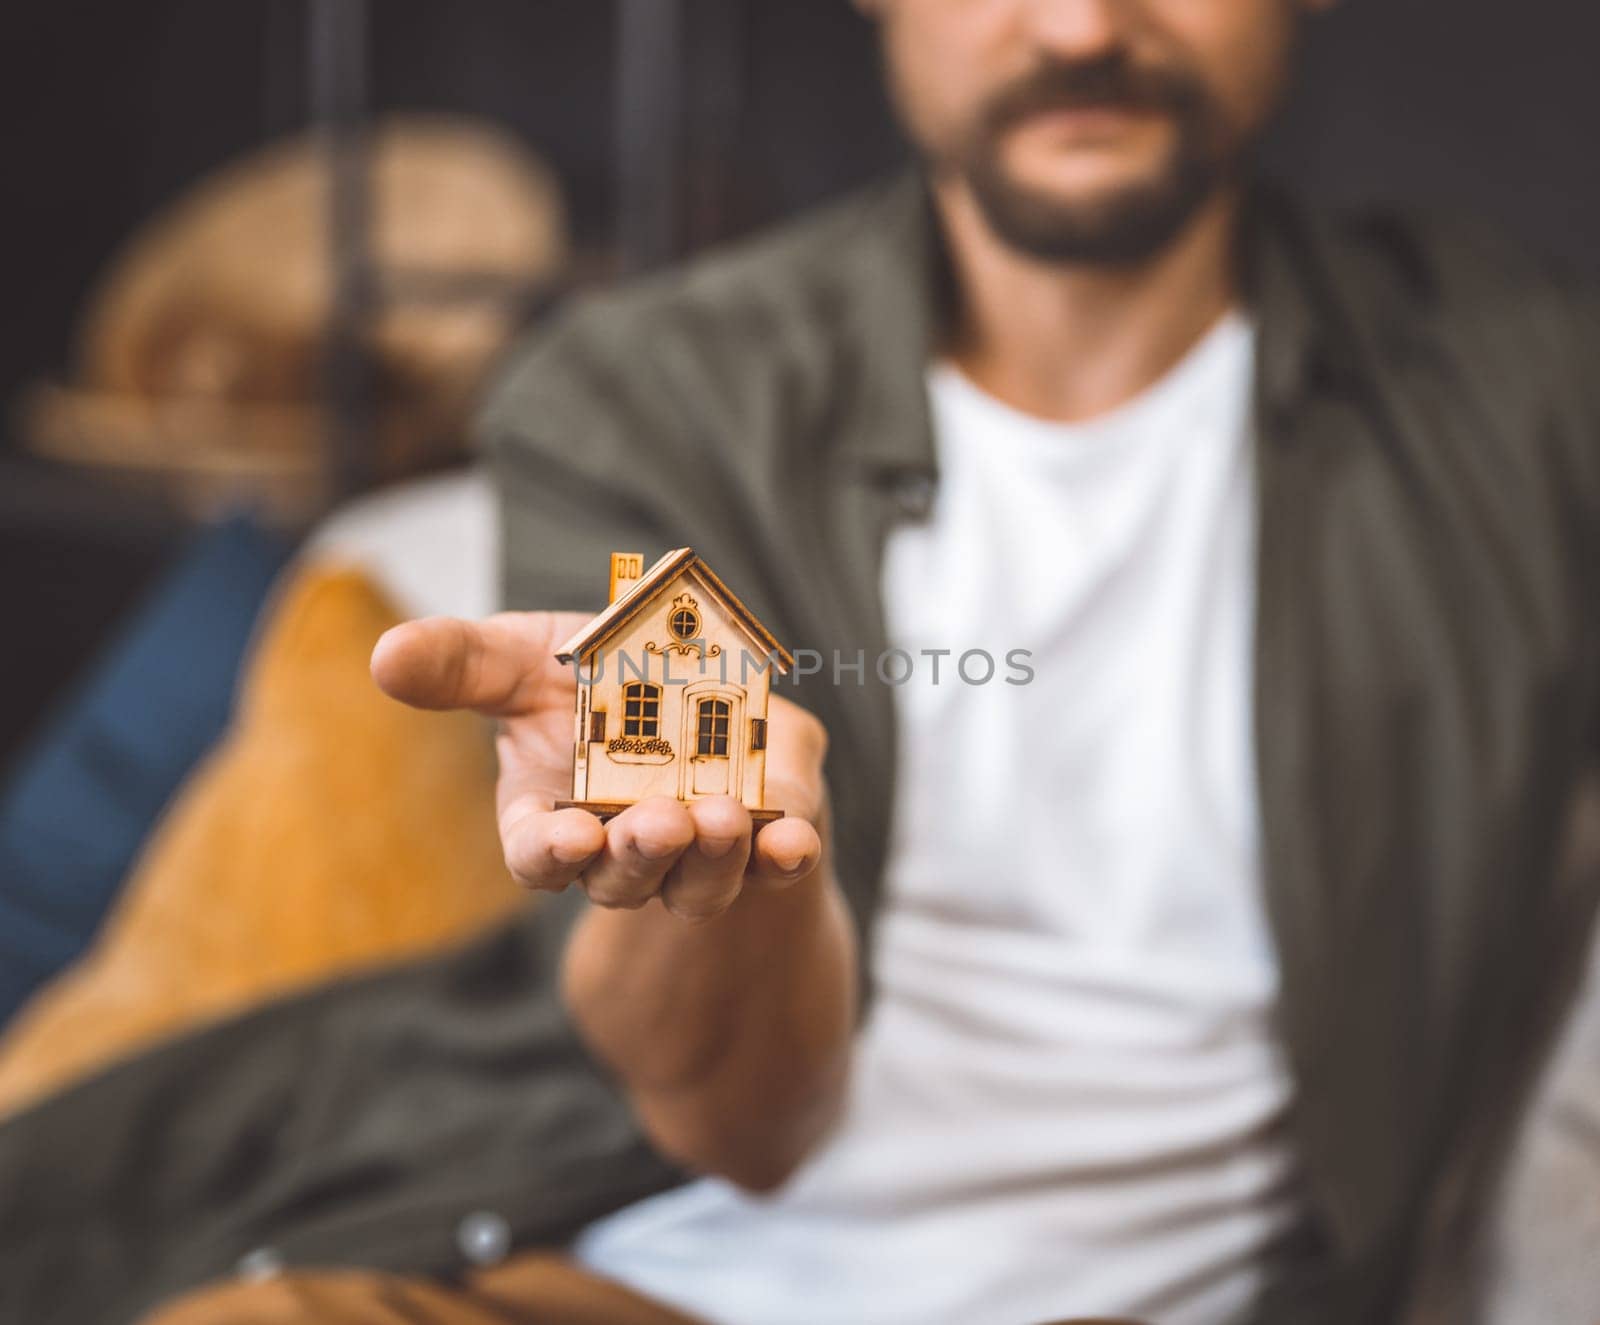 Man holding a small wooden house in his hand.